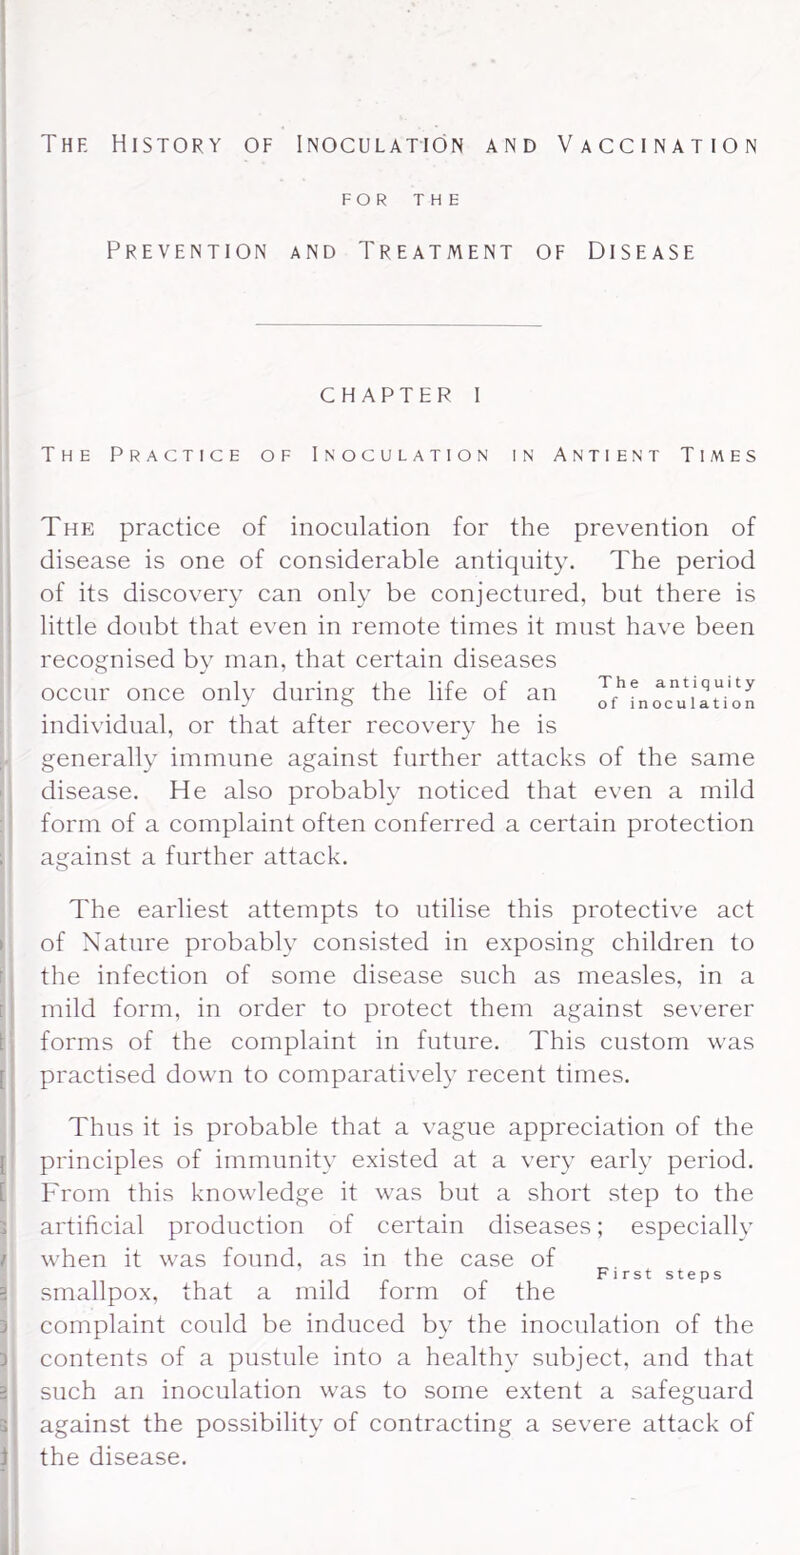 The History of Inoculation and Vaccination FOR THE Prevention and Treatment of Disease chapter i The Practice of Inoculation in Antient Times The practice of inoculation for the prevention of disease is one of considerable antiquity. The period ' of its discovery can only be conjectured, but there is ! little doubt that even in remote times it must have been ' recognised by man, that certain diseases occur once only during the life of an Jo or inoculation individual, or that after recovery he is ; generally immune against further attacks of the same ' disease. He also probably noticed that even a mild : form of a complaint often conferred a certain protection 1 against a further attack. The earliest attempts to utilise this protective act 1 of Nature probably consisted in exposing children to r, the infection of some disease such as measles, in a [ I mild form, in order to protect them against severer I! forms of the complaint in future. This custom was [' practised down to comparatively recent times. I ' Thus it is probable that a vague appreciation of the [ principles of immunity existed at a very early period. [ From this knowledge it was but a short step to the s artificial production of certain diseases; especially / when it was found, as in the case of First steps 3 smallpox, that a mild form of the 3 complaint could be induced by the inoculation of the 3 contents of a pustule into a healthy subject, and that 2 such an inoculation was to some extent a safeguard 3 against the possibility of contracting a severe attack of i the disease. «